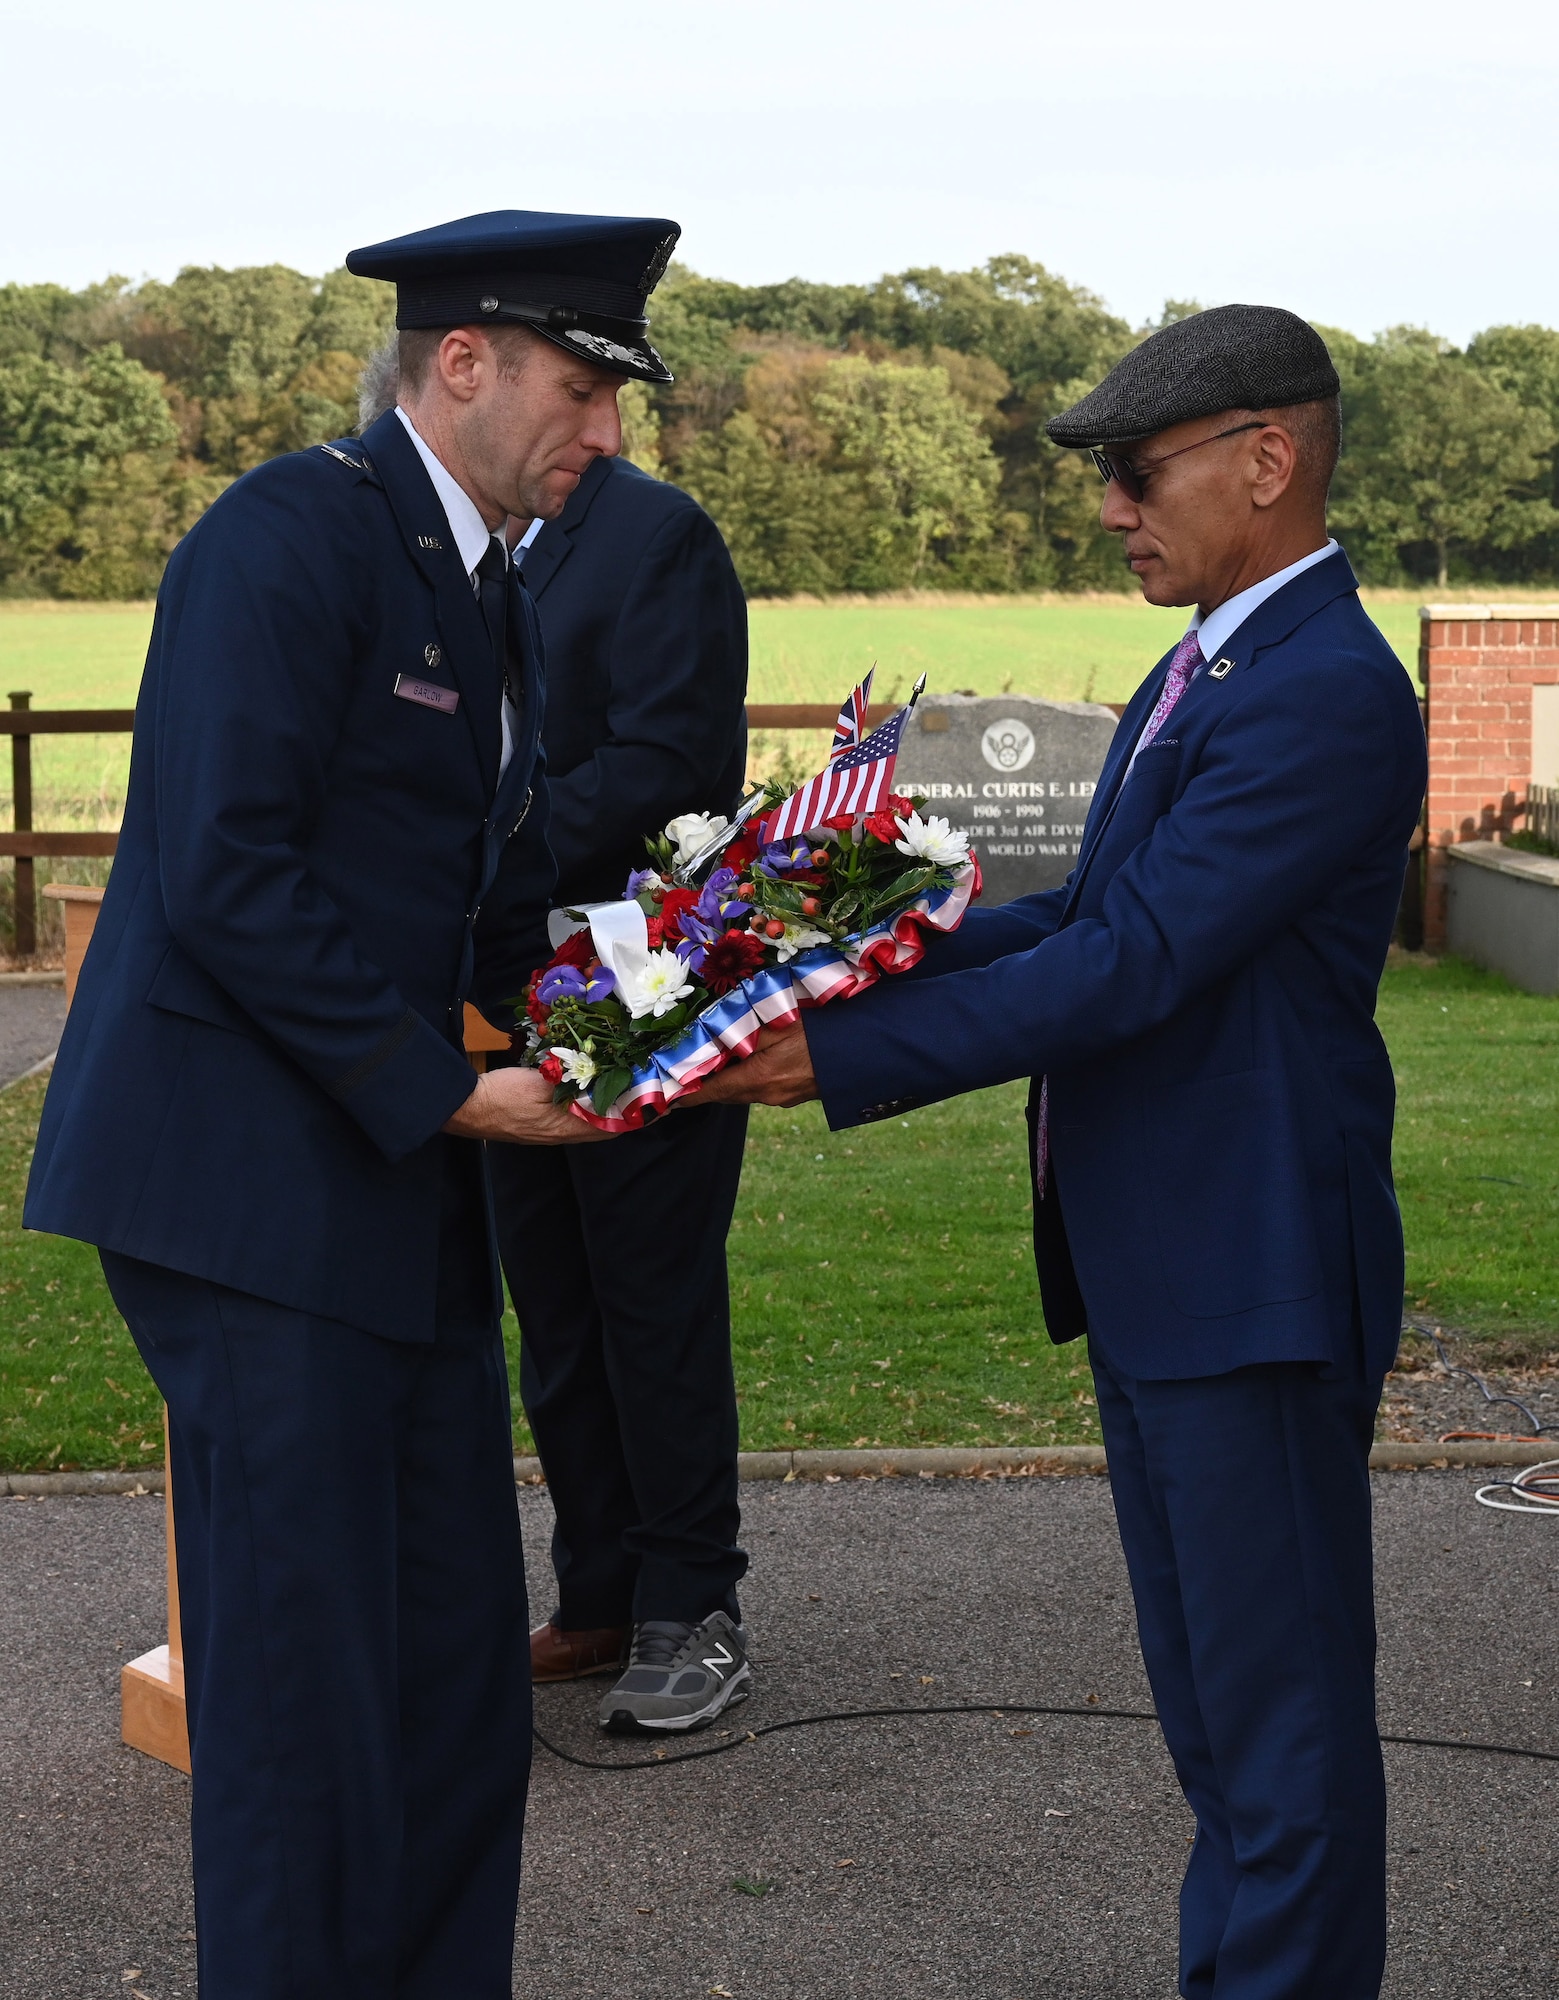 U.S. Air Force Col. Ryan Garlow, left, 100th Air Refueling Wing commander, prepares to lay a wreath on behalf of the Bloody Hundredth at Royal Air Force Mildenhall, and in honor of his step-grandfather, Tech. Sgt. James P. Scott Jr., who was assigned with the 100th Bomb Group during World War II, during a ceremony to remember the 80th anniversary of “Black Week” at Thorpe Abbotts, Norfolk, England, Oct. 10, 2023. During “Black Week,” the Mighty Eighth lost 138 heavy bombers, 24 fighters and more than 1,400 Airmen to enemy action. The 100th BG itself suffered the tragic loss of 12 aircraft and 121 crew members over Germany. (U.S. Air Force photo by Karen Abeyasekere)